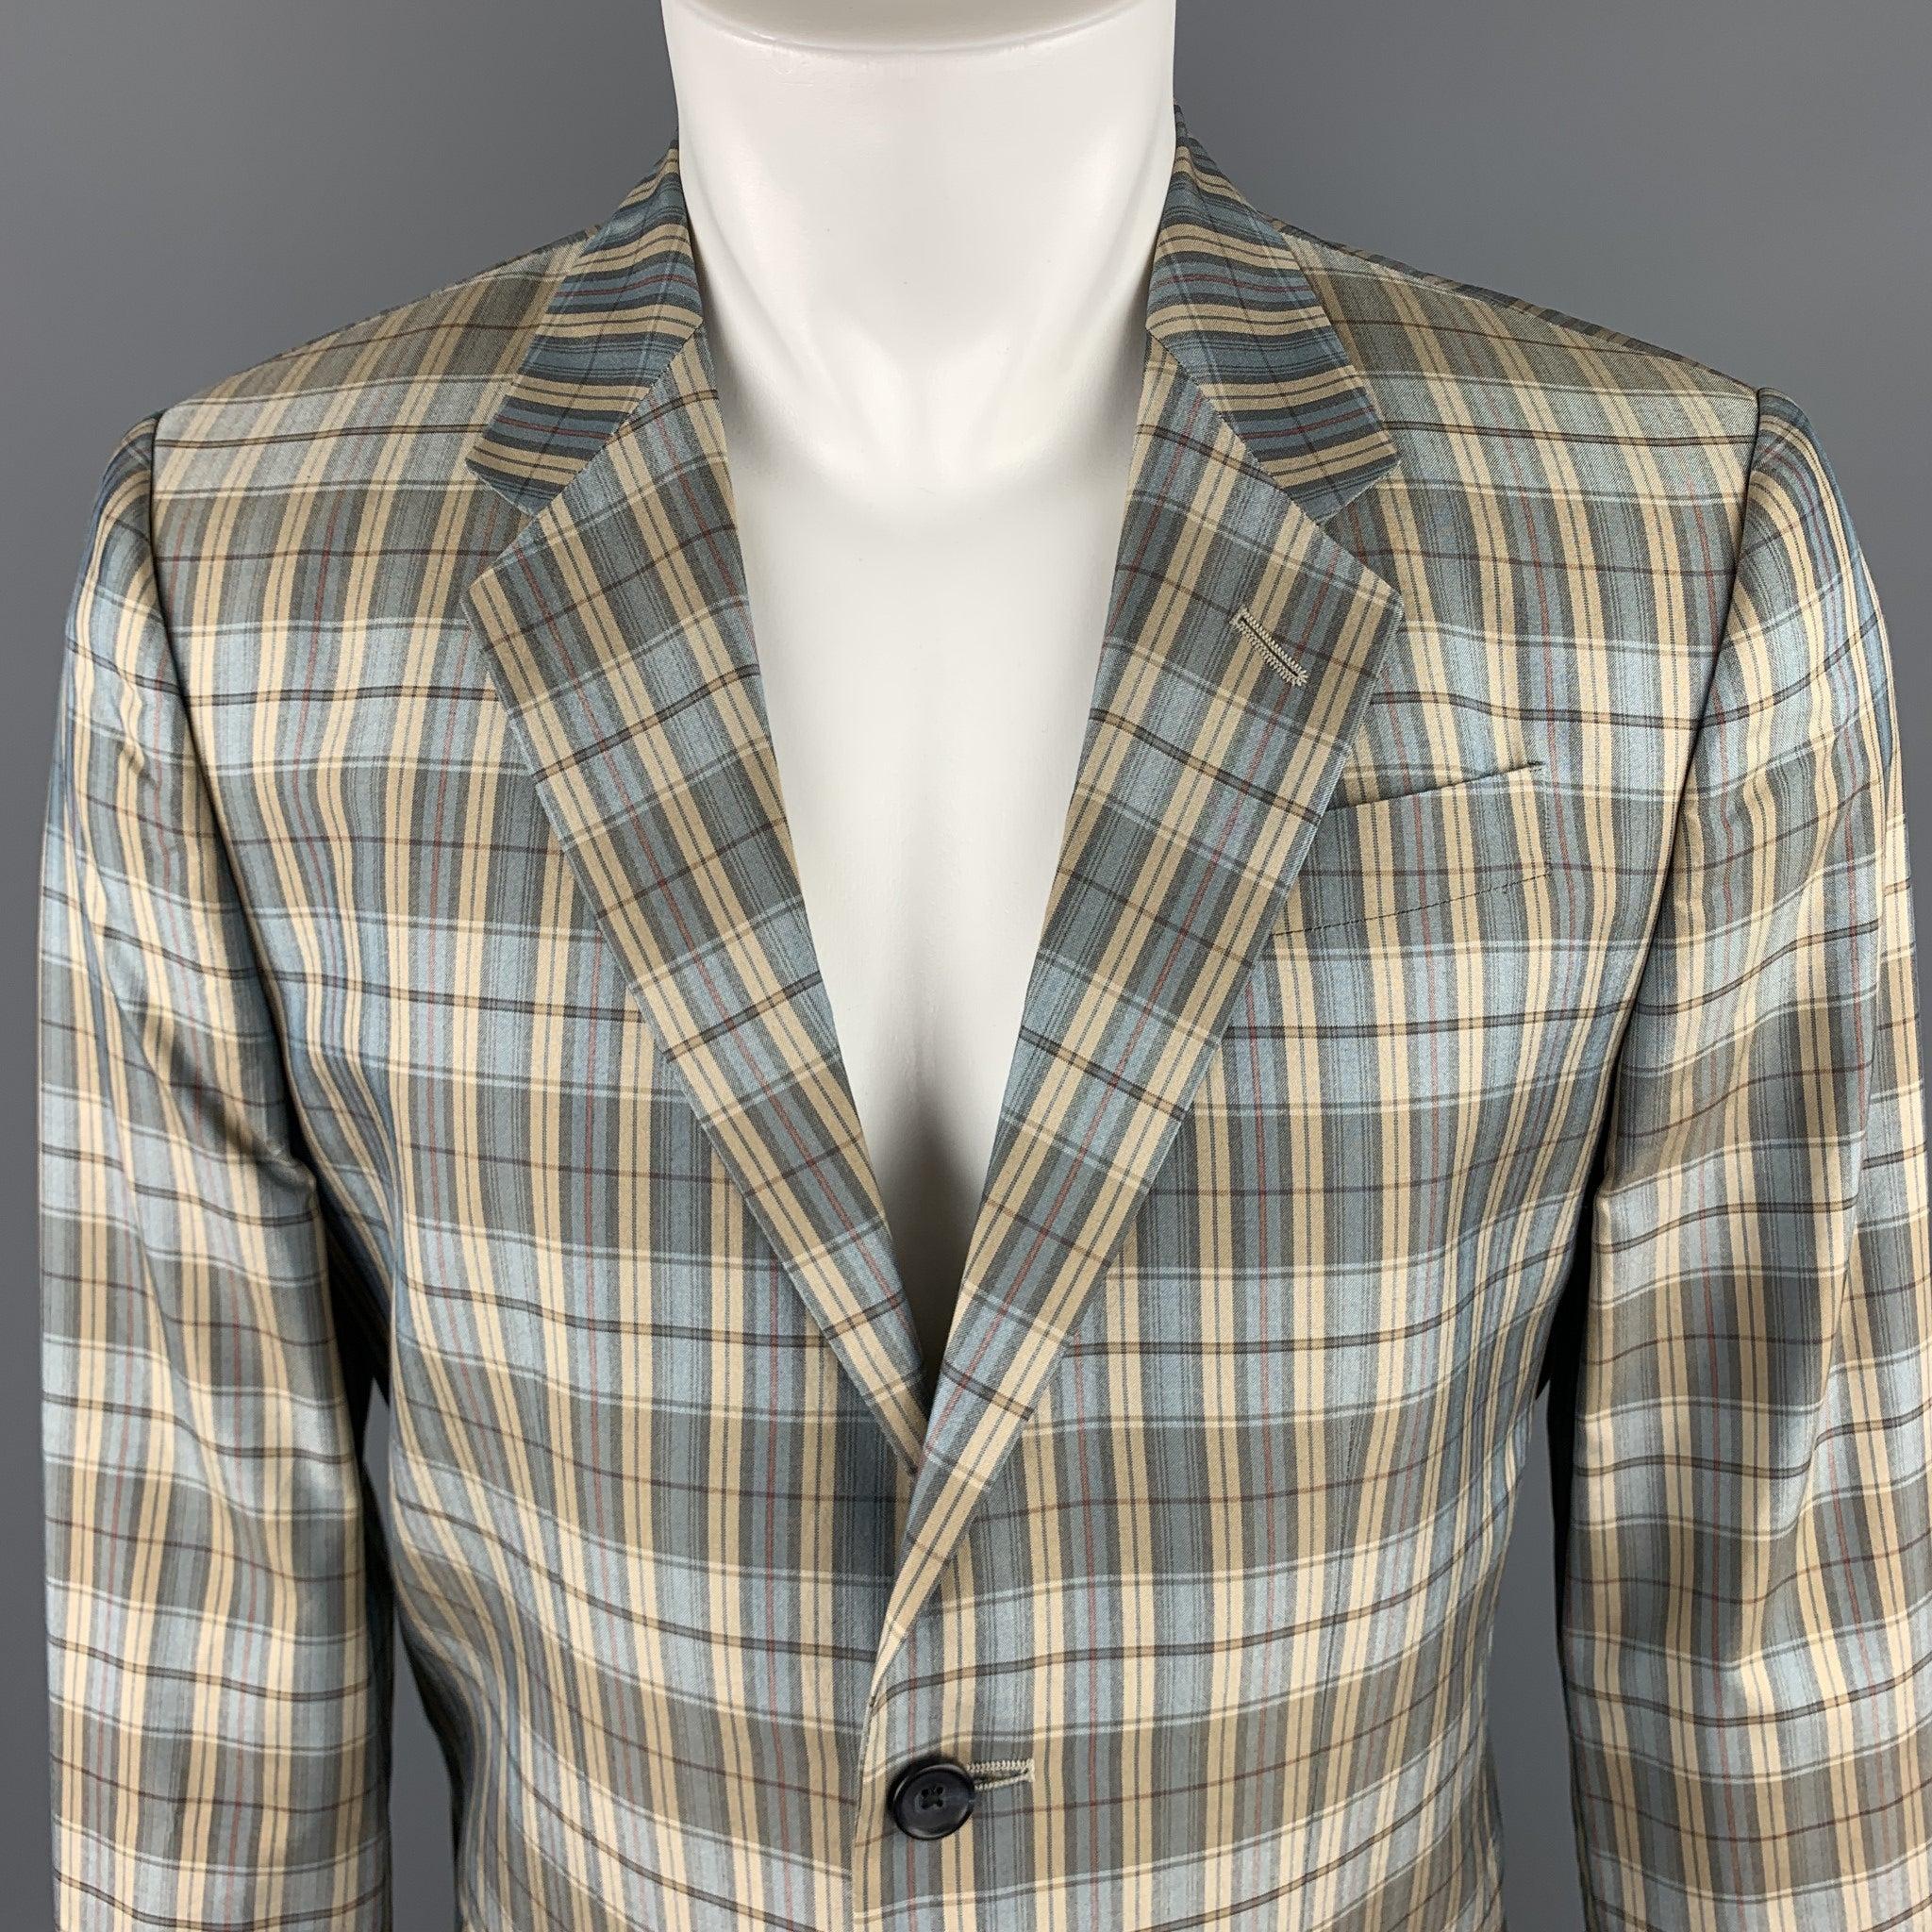 MARC by MARC JACOBS
sport coat comes in with a notch lapel, single breasted, two button front, and functional button cuffs.
Excellent Pre-Owned Condition. 

Marked:   L 

Measurements: 
 
Shoulder:
17 inches Chest:
42 inches Sleeve:
26 inches